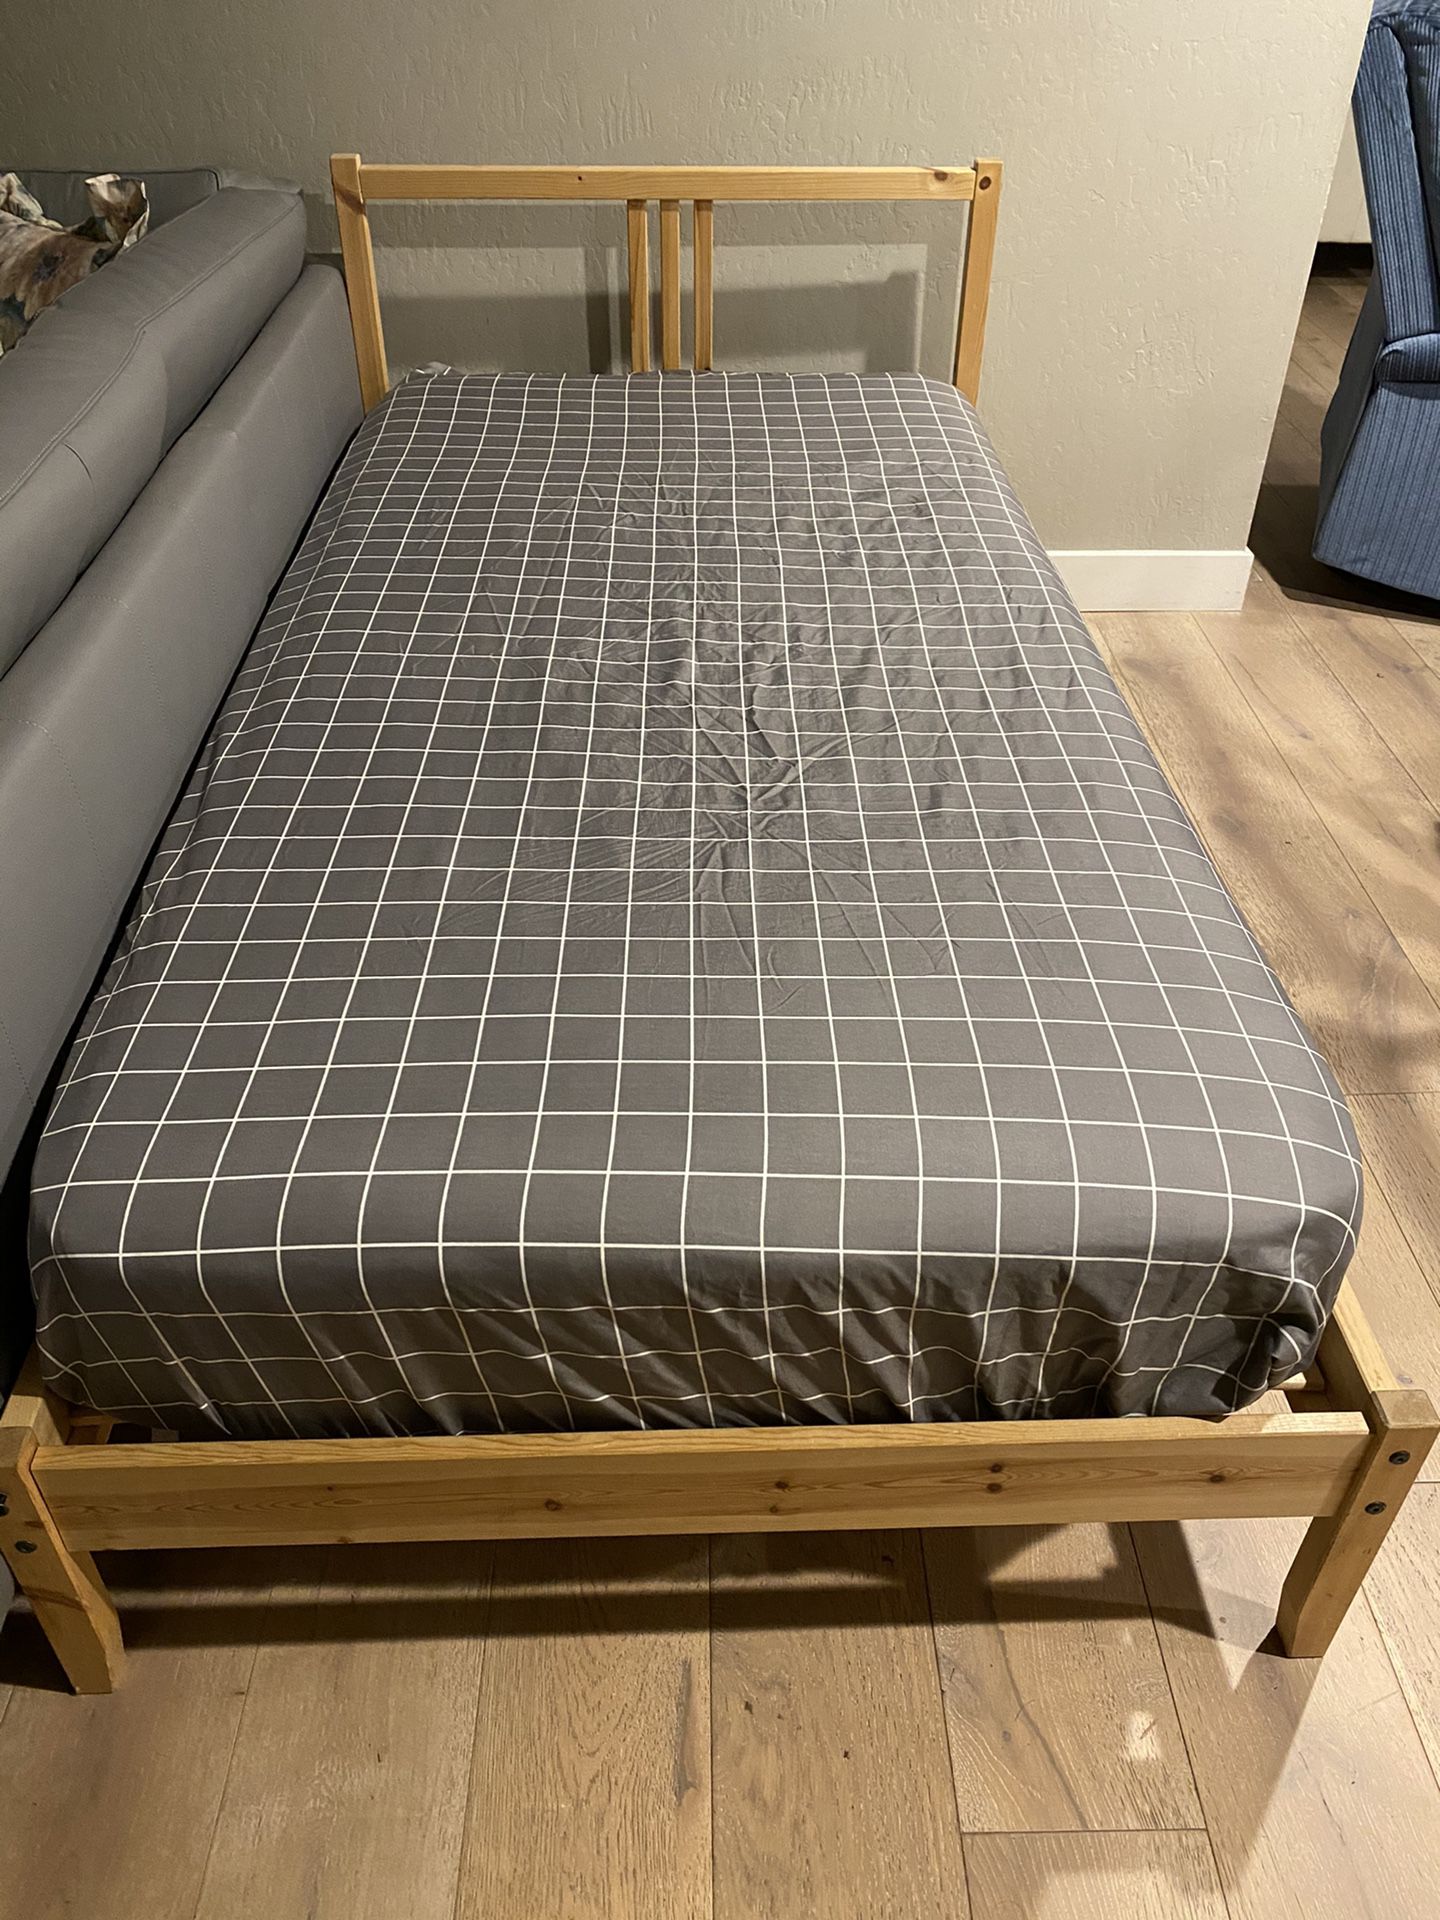 Ikea wood twin bed with mattress